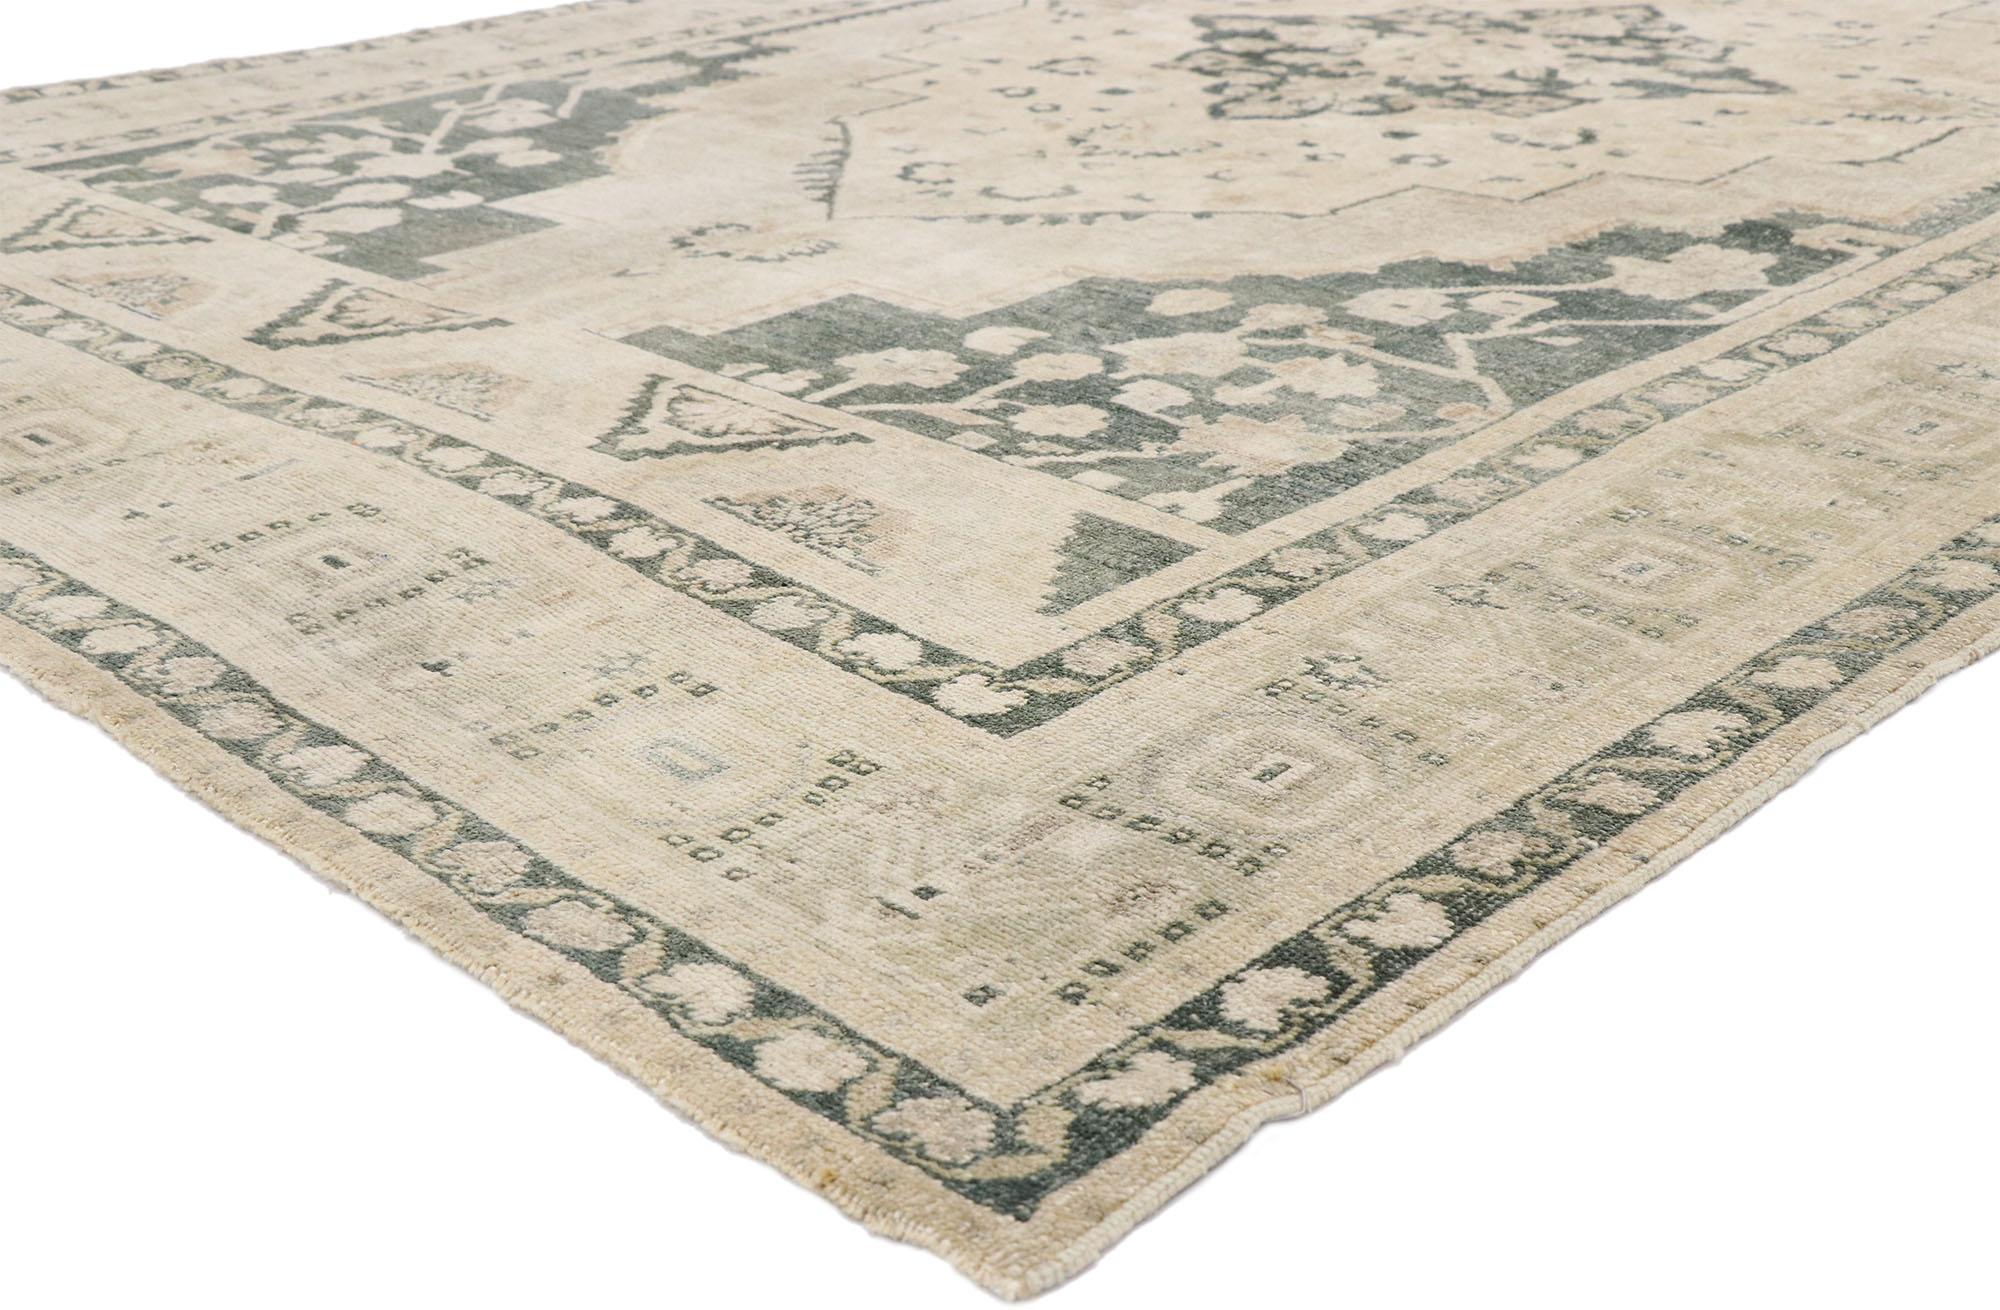 52673, Vintage Turkish Oushak Gallery Rug with Colonial Shaker Style. In this hand knotted wool vintage Turkish Oushak gallery rug, we bare witness to the successful application of design principles touted by the Shaker design aesthetic. With